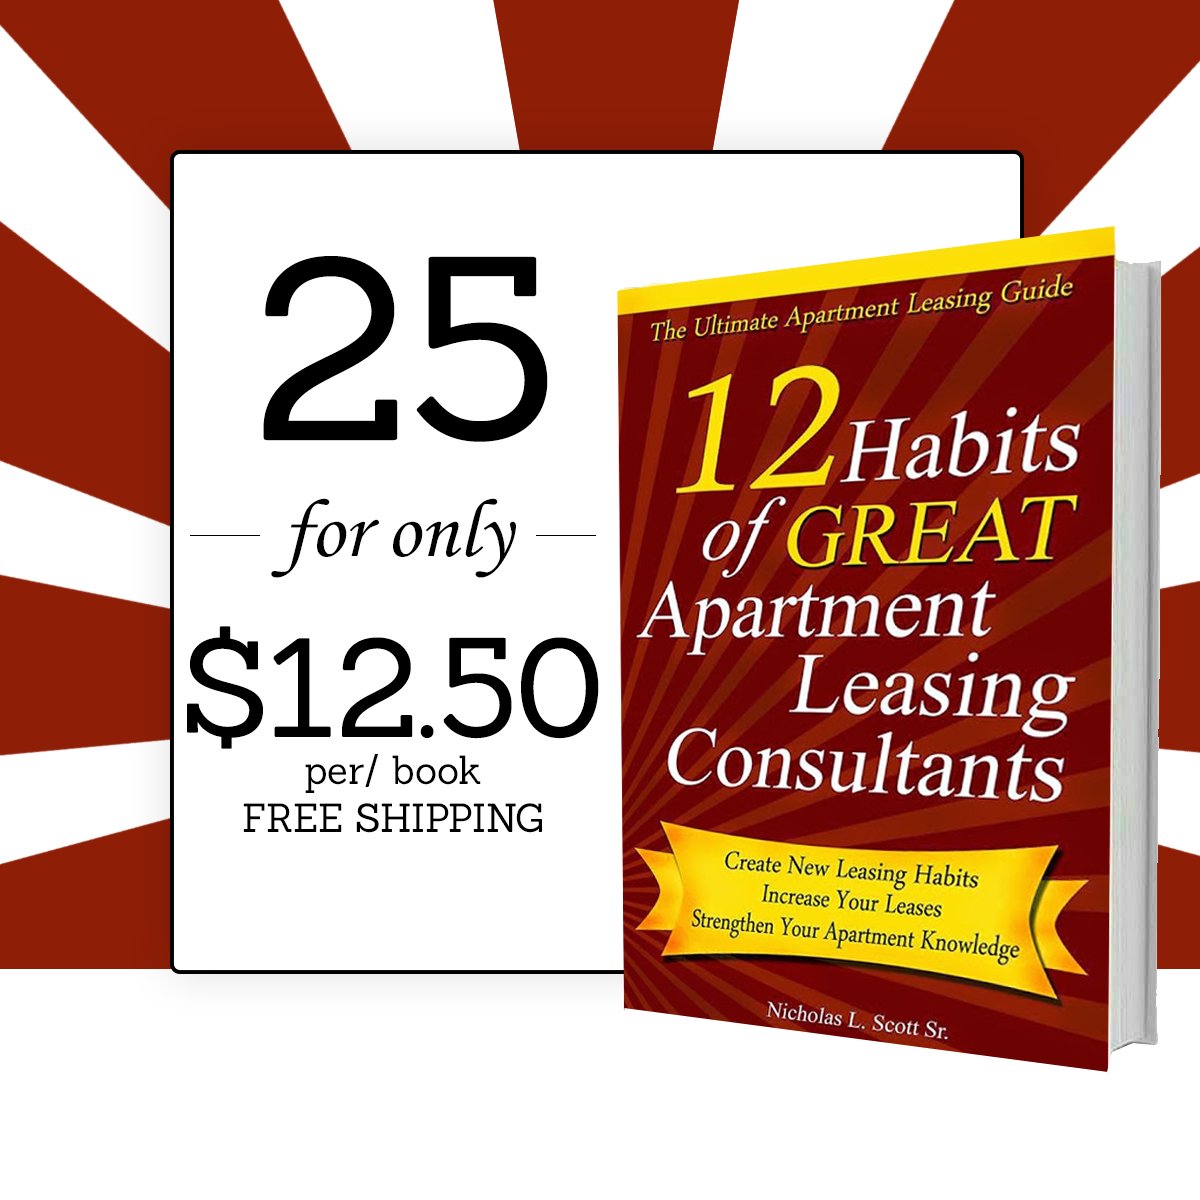 Image of 25 Sets : 12 Habits of Great Apartment Leasing Consultants - The Book ($12.50 per/book)